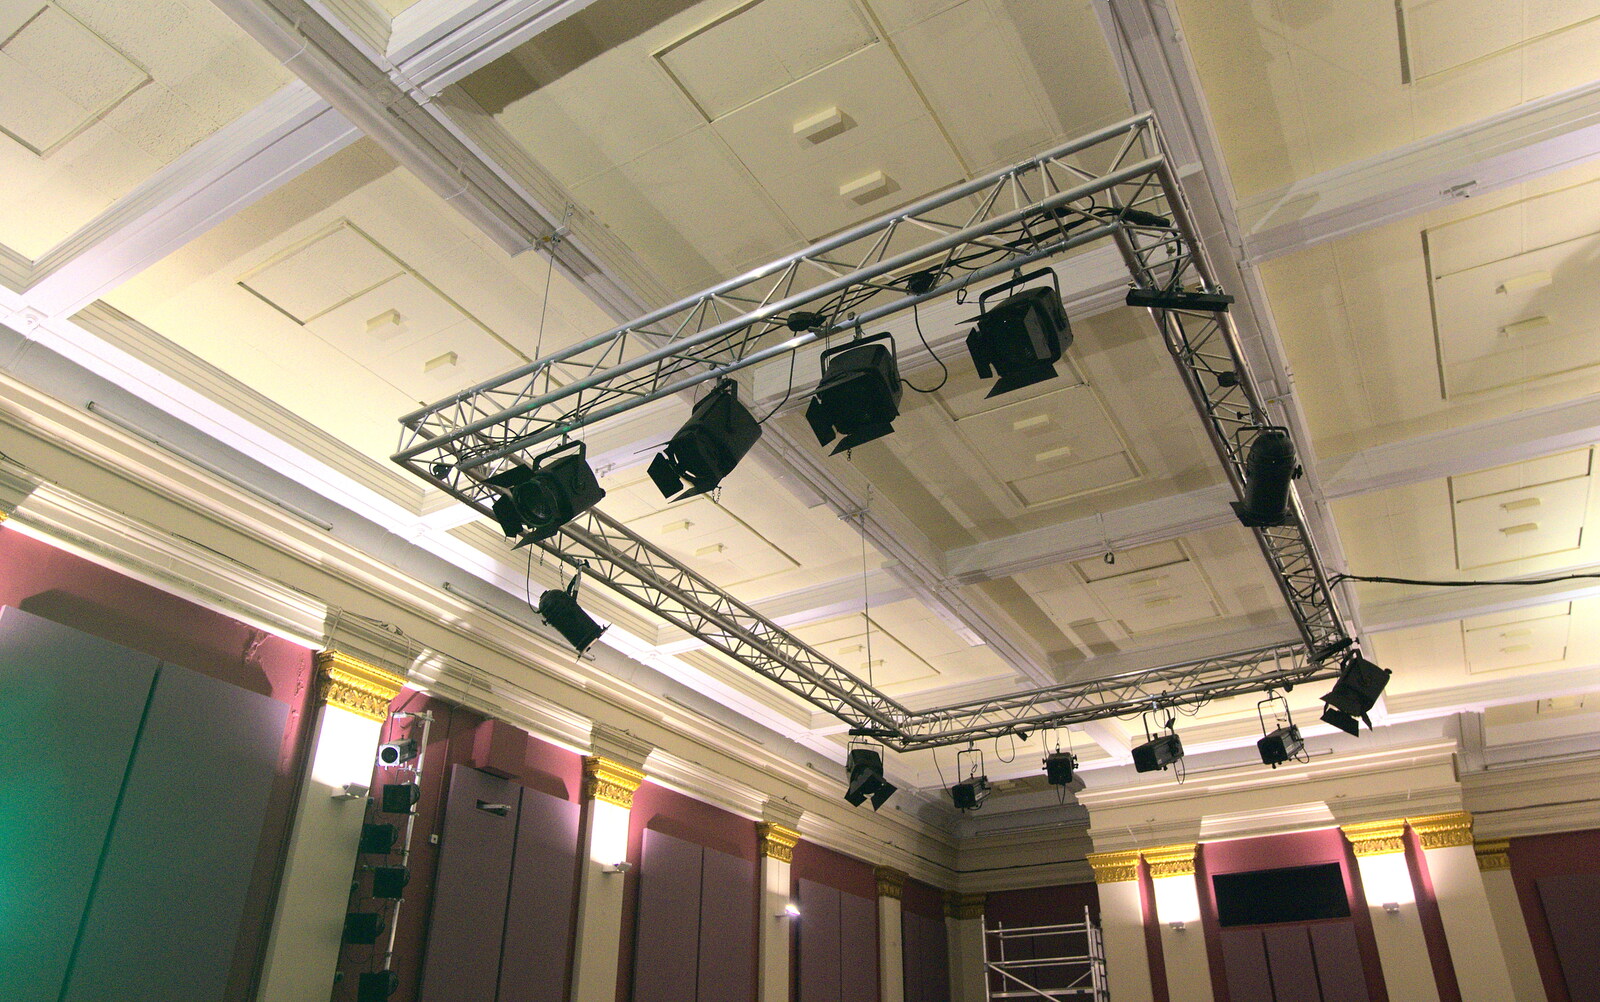 A lighting gantry on the ceiling from The BBs at The Cornhall, Diss, Norfolk - 31st January 2013